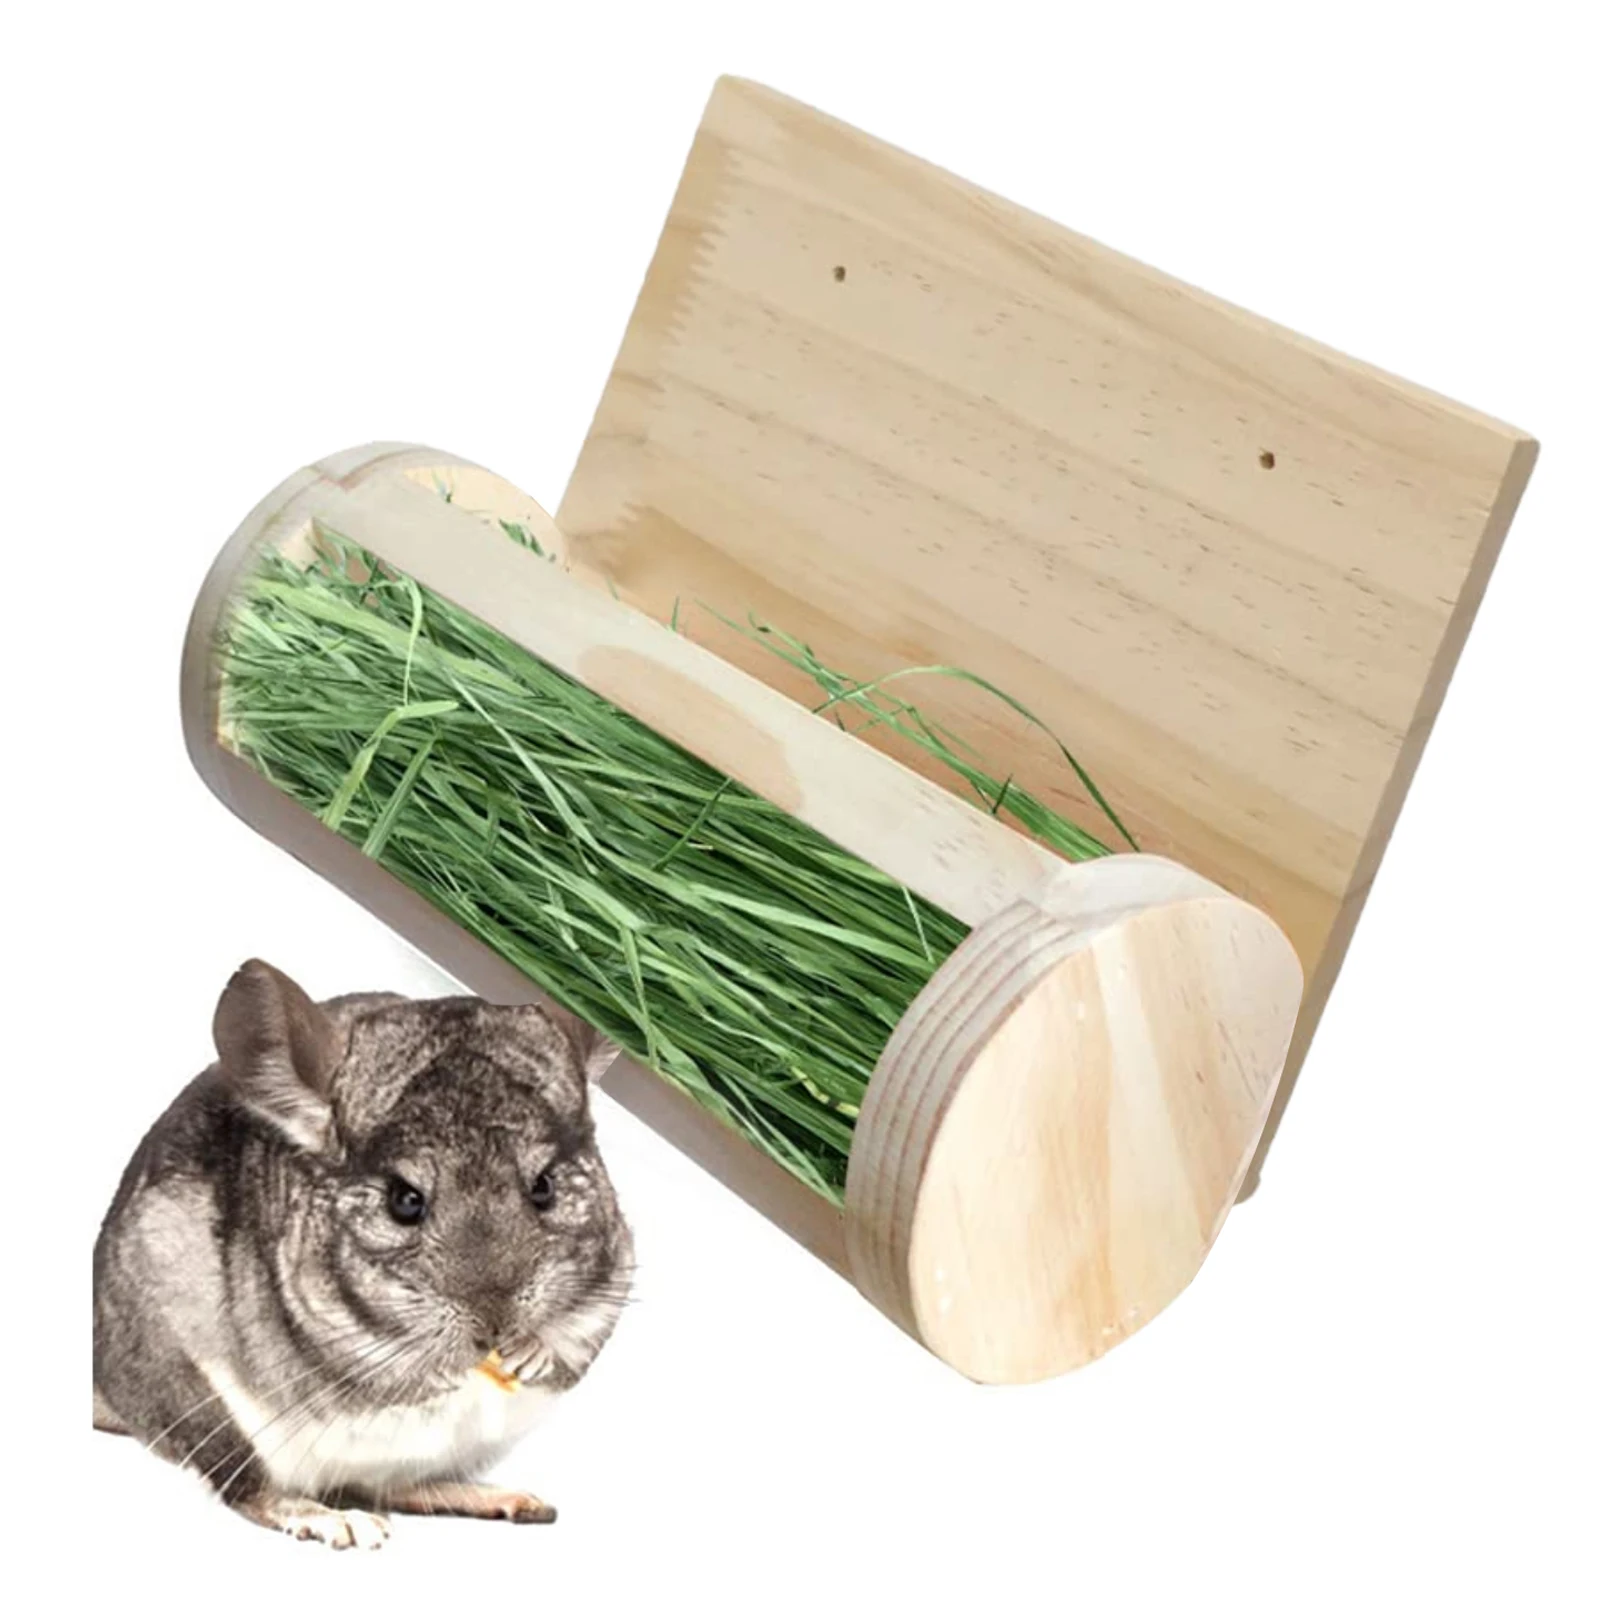 Hamiledyi Rabbit Hay Feeder Wooden Manger Grass Holder Cylindrical Guinea Pig Stand Feeding with Cover for Small Pets Bunny Chinchilla Hamster 